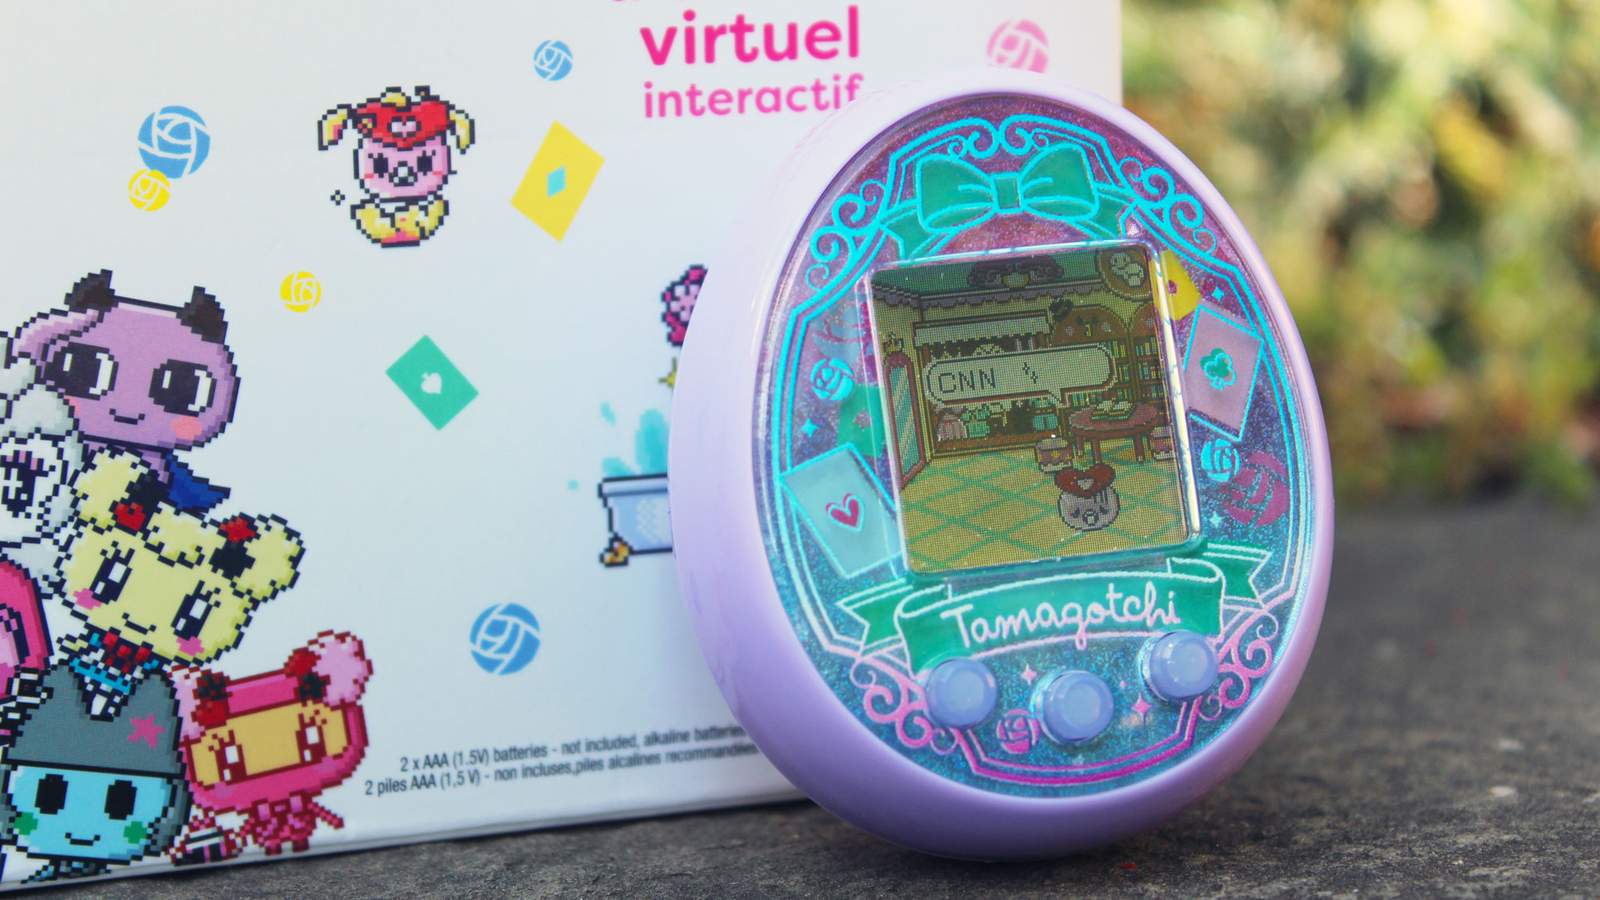 The Tamagotchi virtual pet from the 90s is back